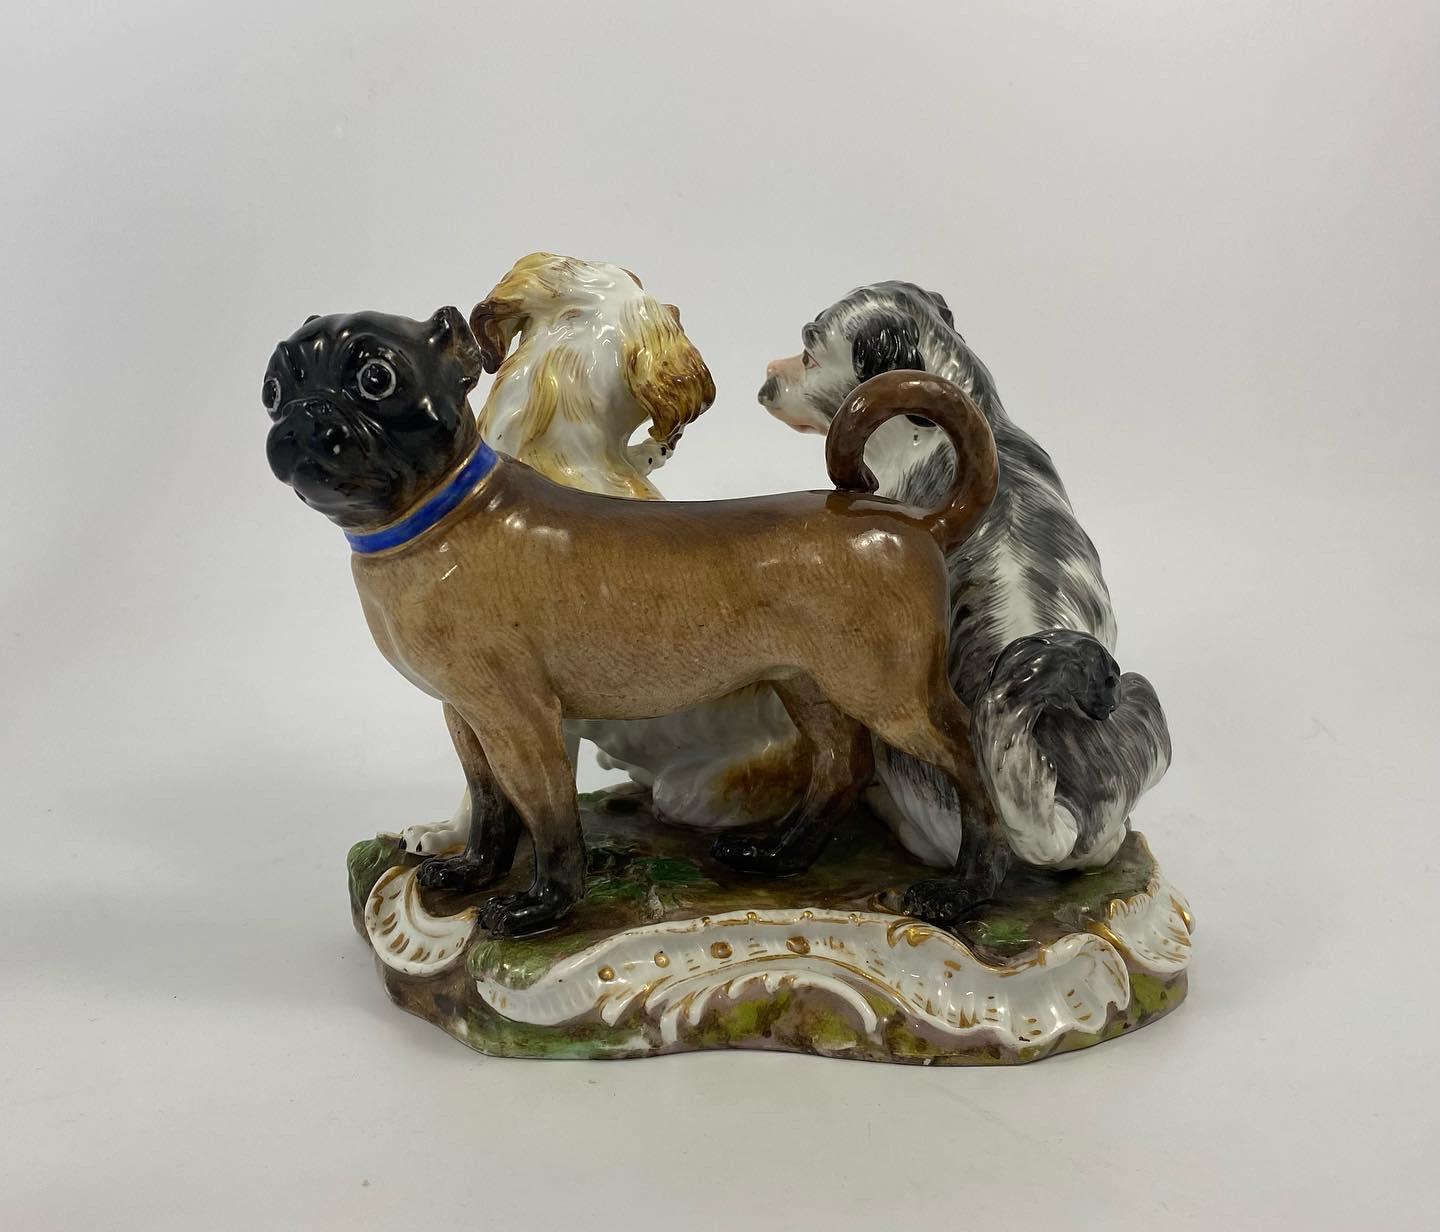 Meissen porcelain figure group of dogs, c. 1870. Modelled after Kaendler, the group is finely modelled as two Bolognese Spaniels, and a pug dog, set upon a shaped grassy mound base, edged in moulded rocaille, heightened in gilt.
The dogs are